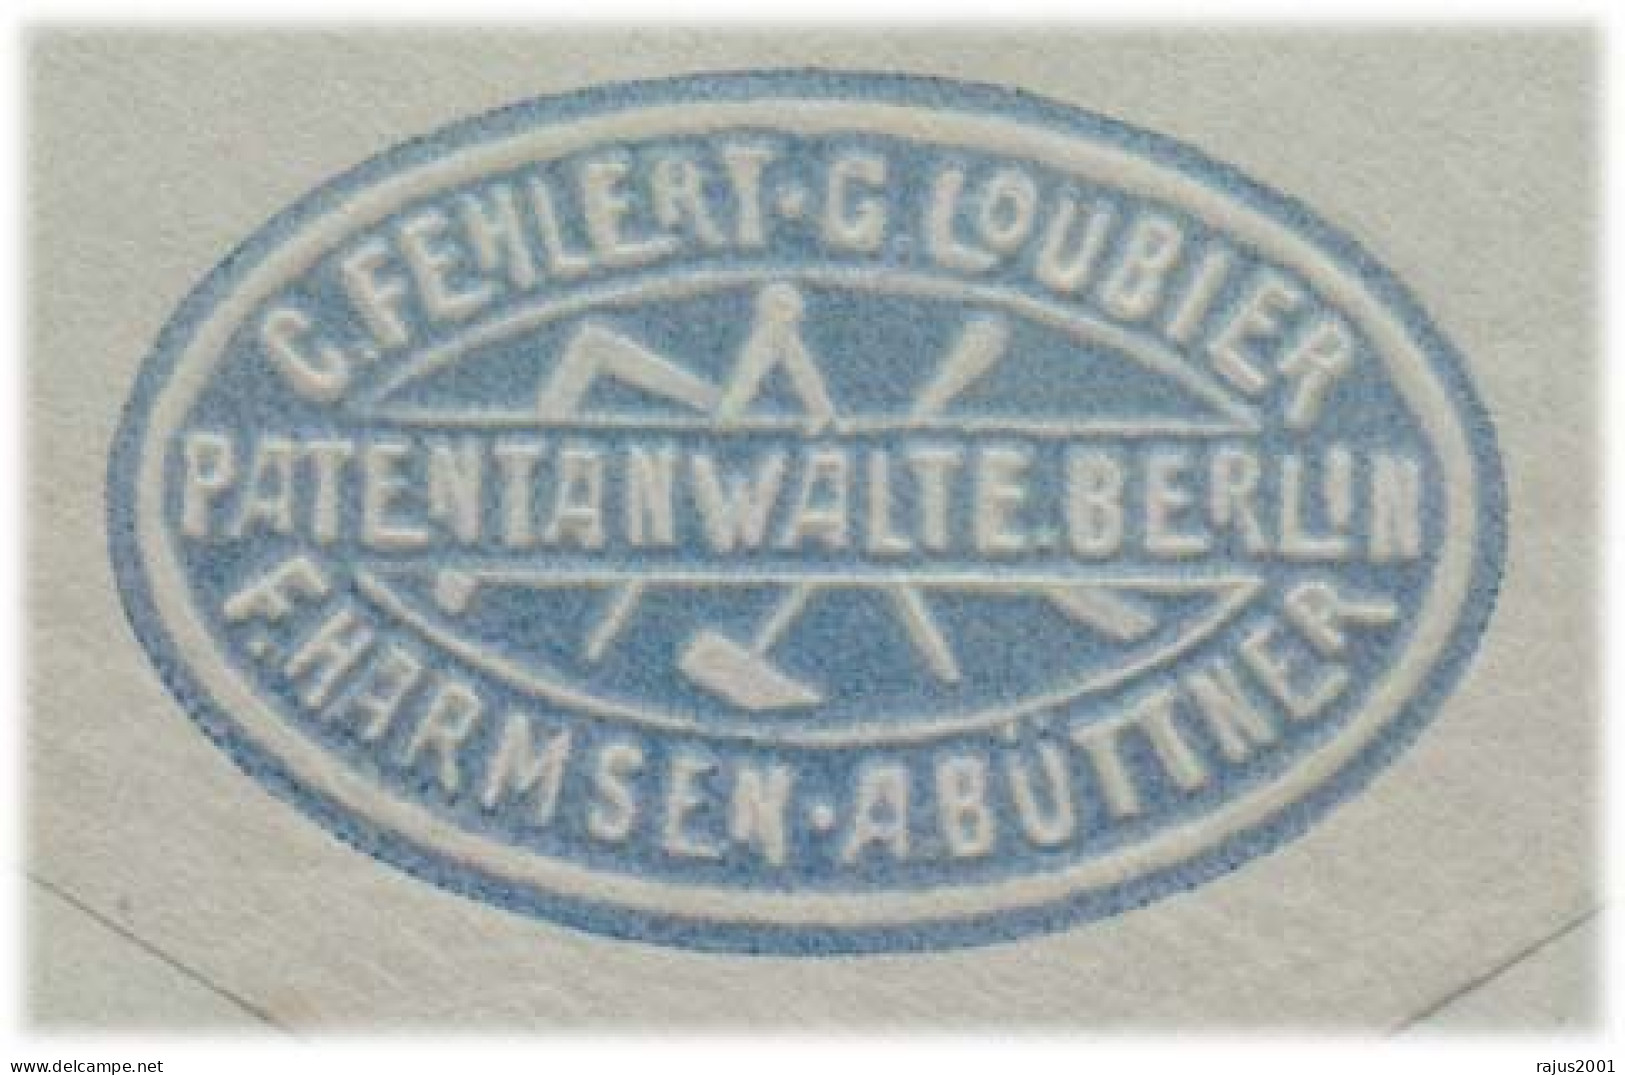 Deutsches Reich Berlin 1906, Received Cyrus Kehr  Germany Postal Stationery Cover - Briefe